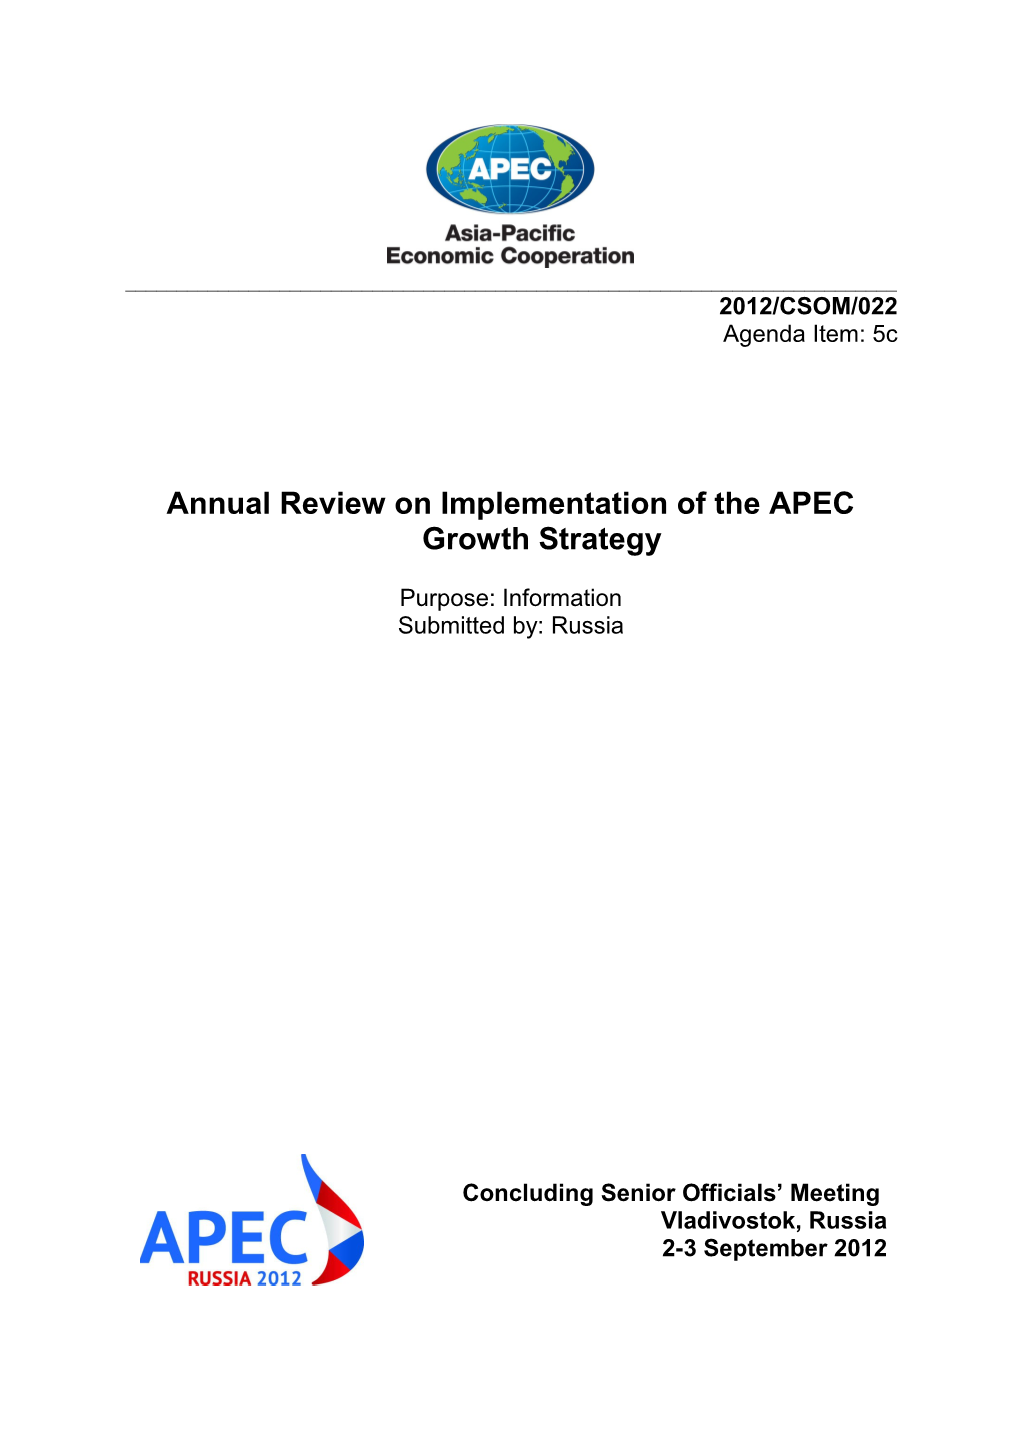 Annual Review on Implementation of the APEC Growth Strategy